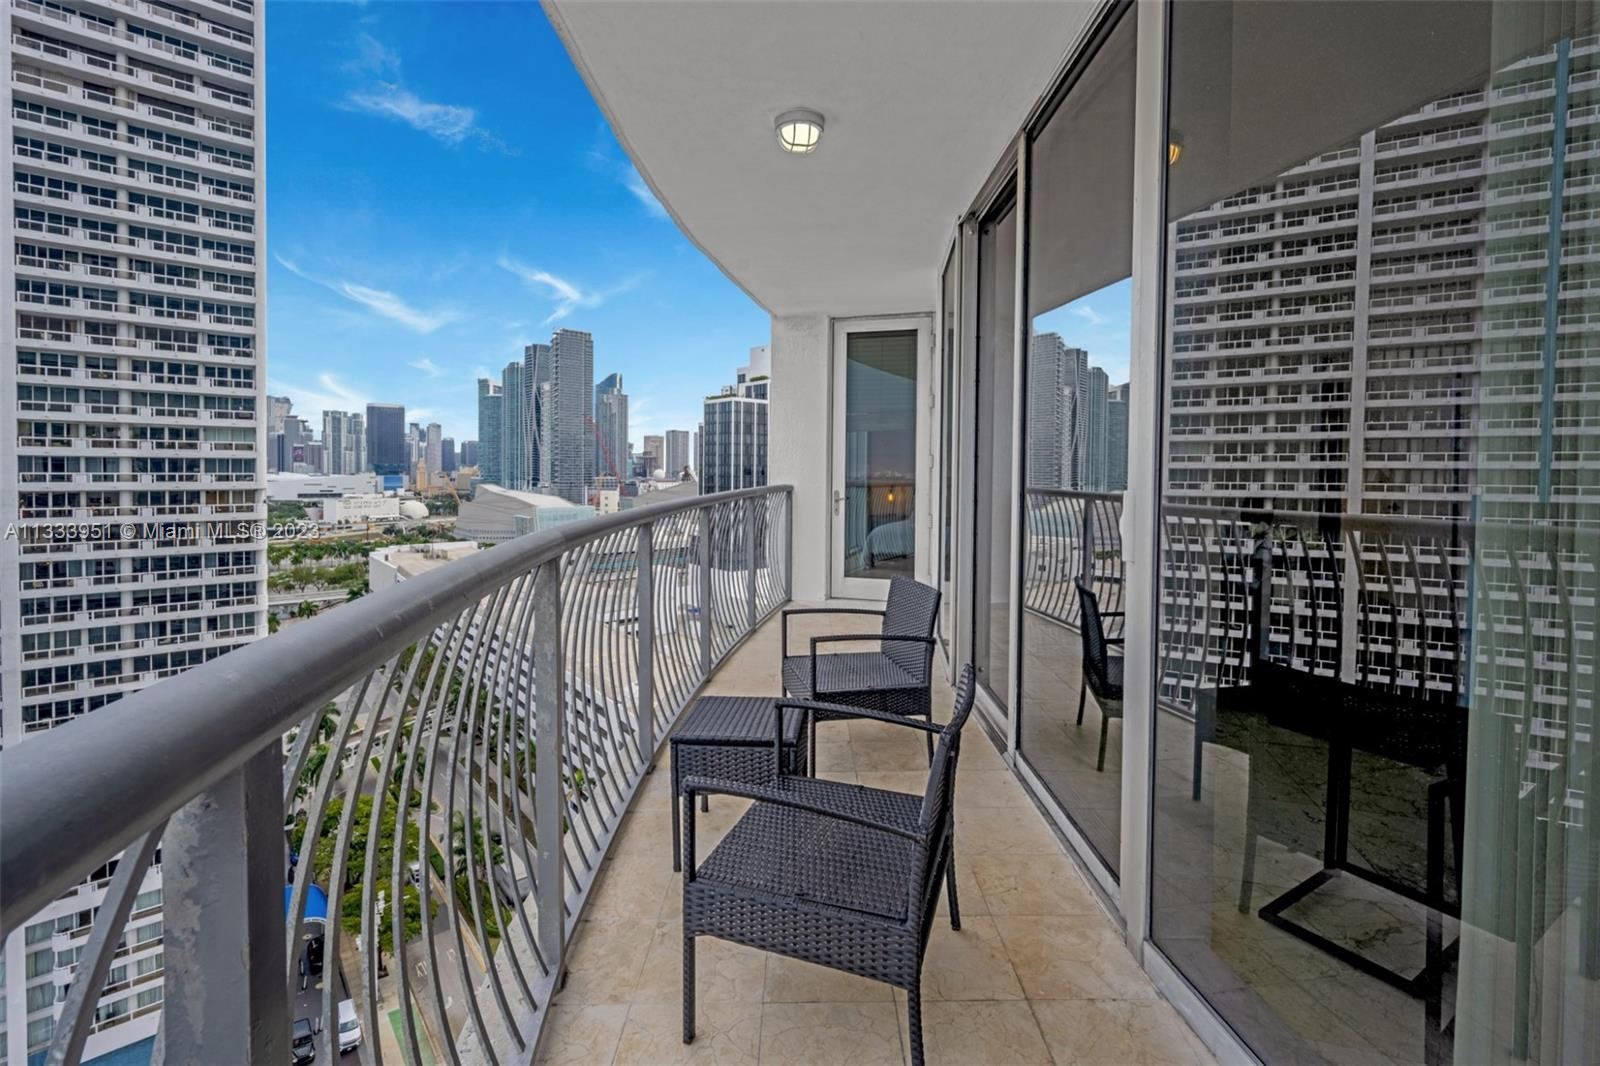 Photo 9 of Listing MLS a11333951 in 1750 N Bayshore Dr #2102 Miami FL 33132